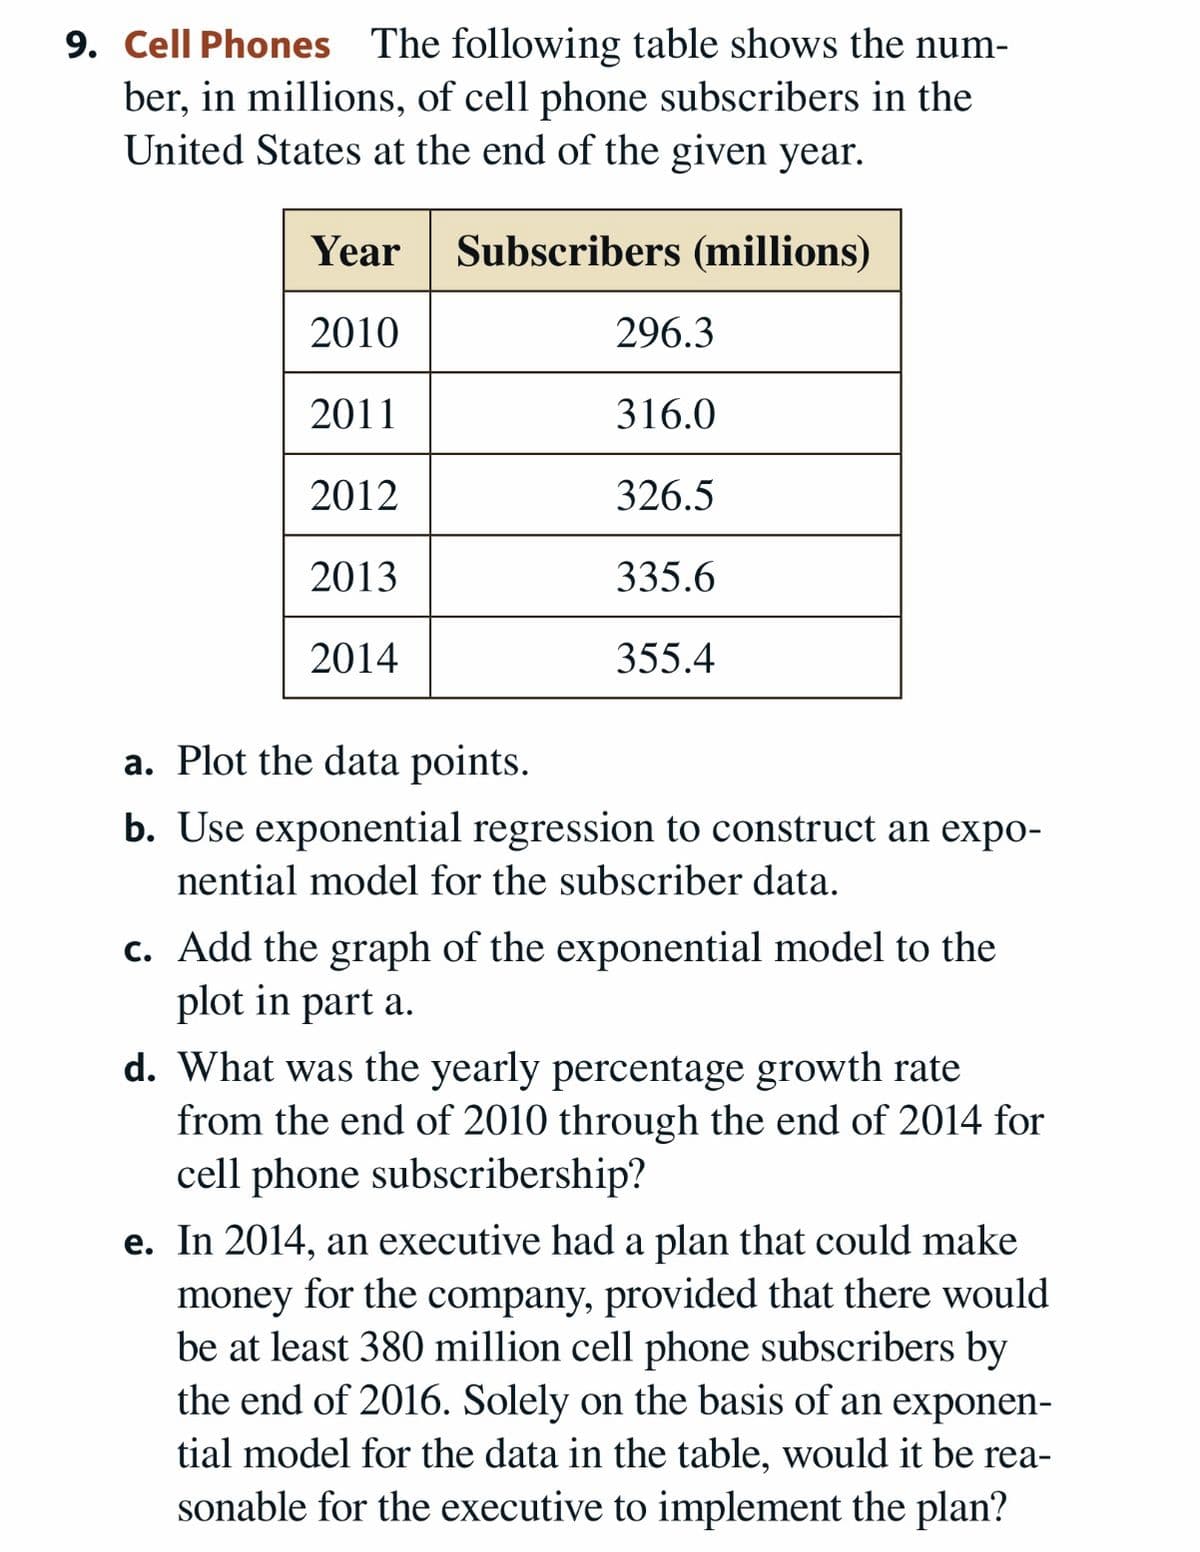 9. Cell Phones The following table shows the num-
ber, in millions, of cell phone subscribers in the
United States at the end of the given year.
Year
Subscribers (millions)
2010
296.3
2011
316.0
2012
326.5
2013
335.6
2014
355.4
a. Plot the data points.
b. Use exponential regression to construct an expo-
nential model for the subscriber data.
c. Add the graph of the exponential model to the
plot in part a.
d. What was the yearly percentage growth rate
from the end of 2010 through the end of 2014 for
cell phone subscribership?
e. In 2014, an executive had a plan that could make
money for the company, provided that there would
be at least 380 million cell phone subscribers by
the end of 2016. Solely on the basis of an exponen-
tial model for the data in the table, would it be rea-
sonable for the executive to implement the plan?
